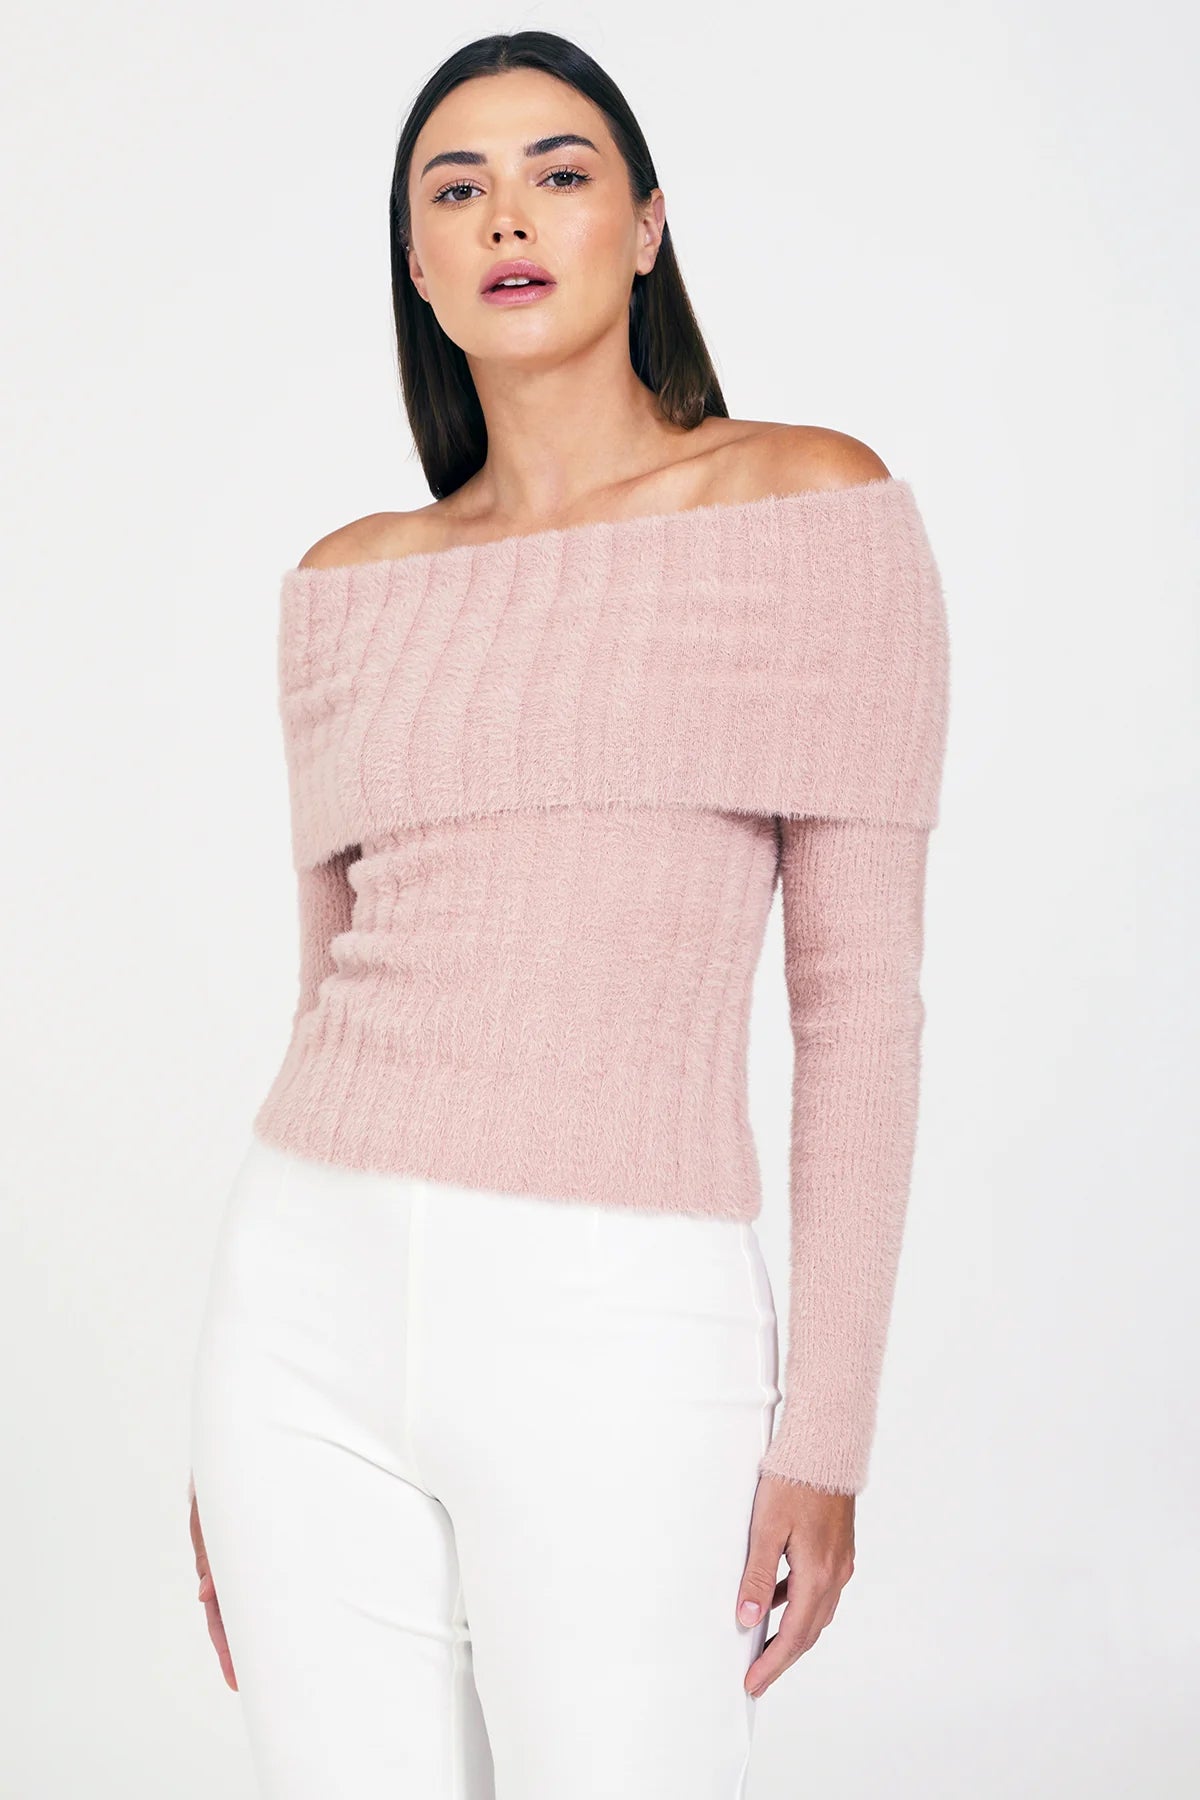 Tores Sweater Top Blush - Bailey 44